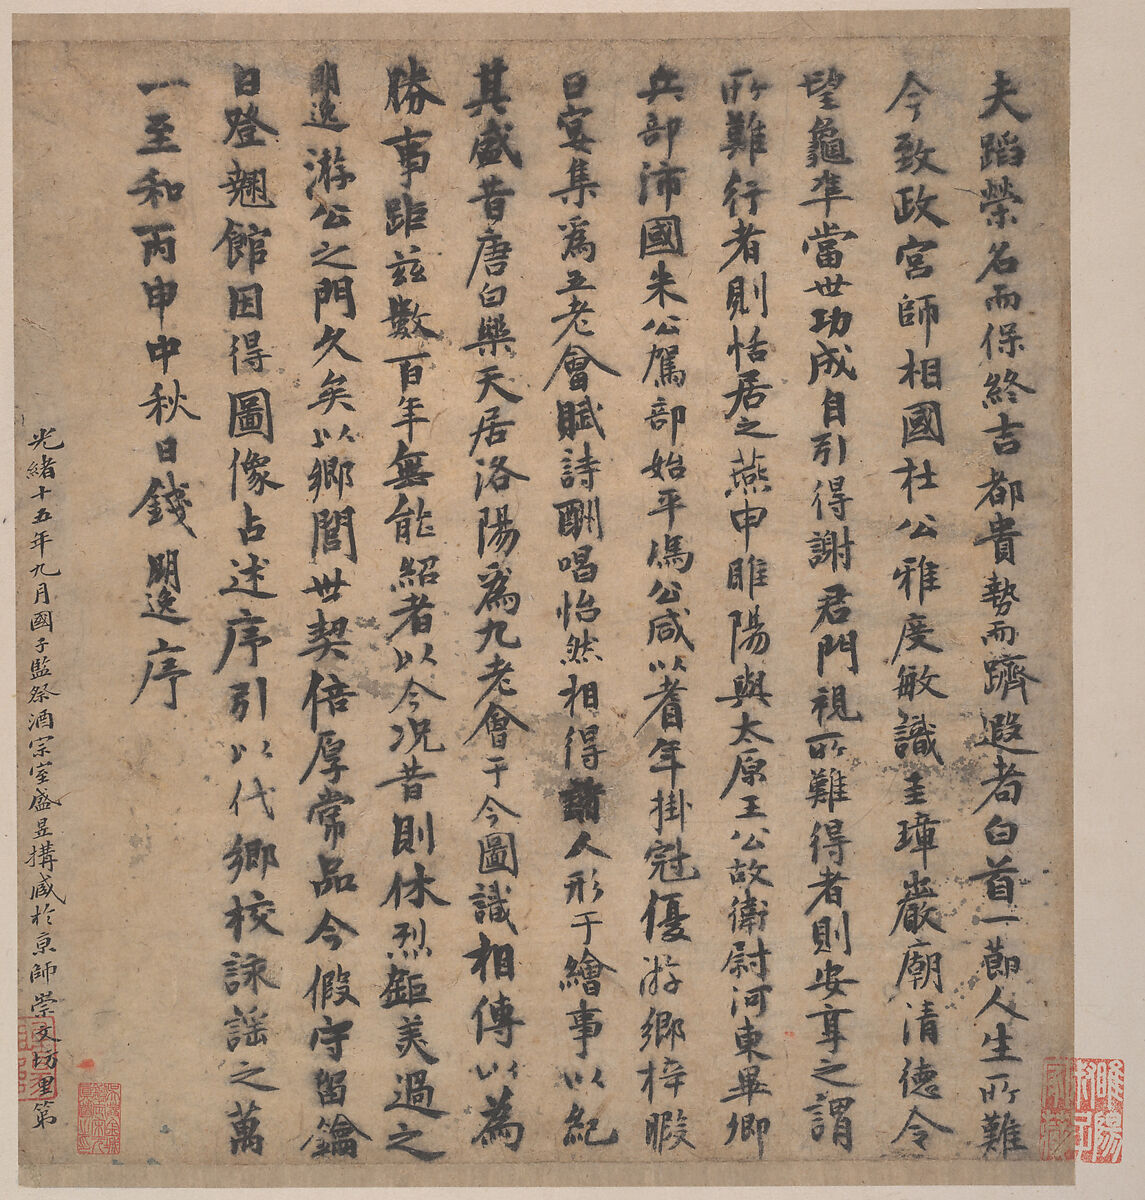 Frontispiece and Colophons to the Album "Five Old Men of Suiyang", Various Scholars (11th–20th centuries), Album of fifteen leaves; ink on paper, China 